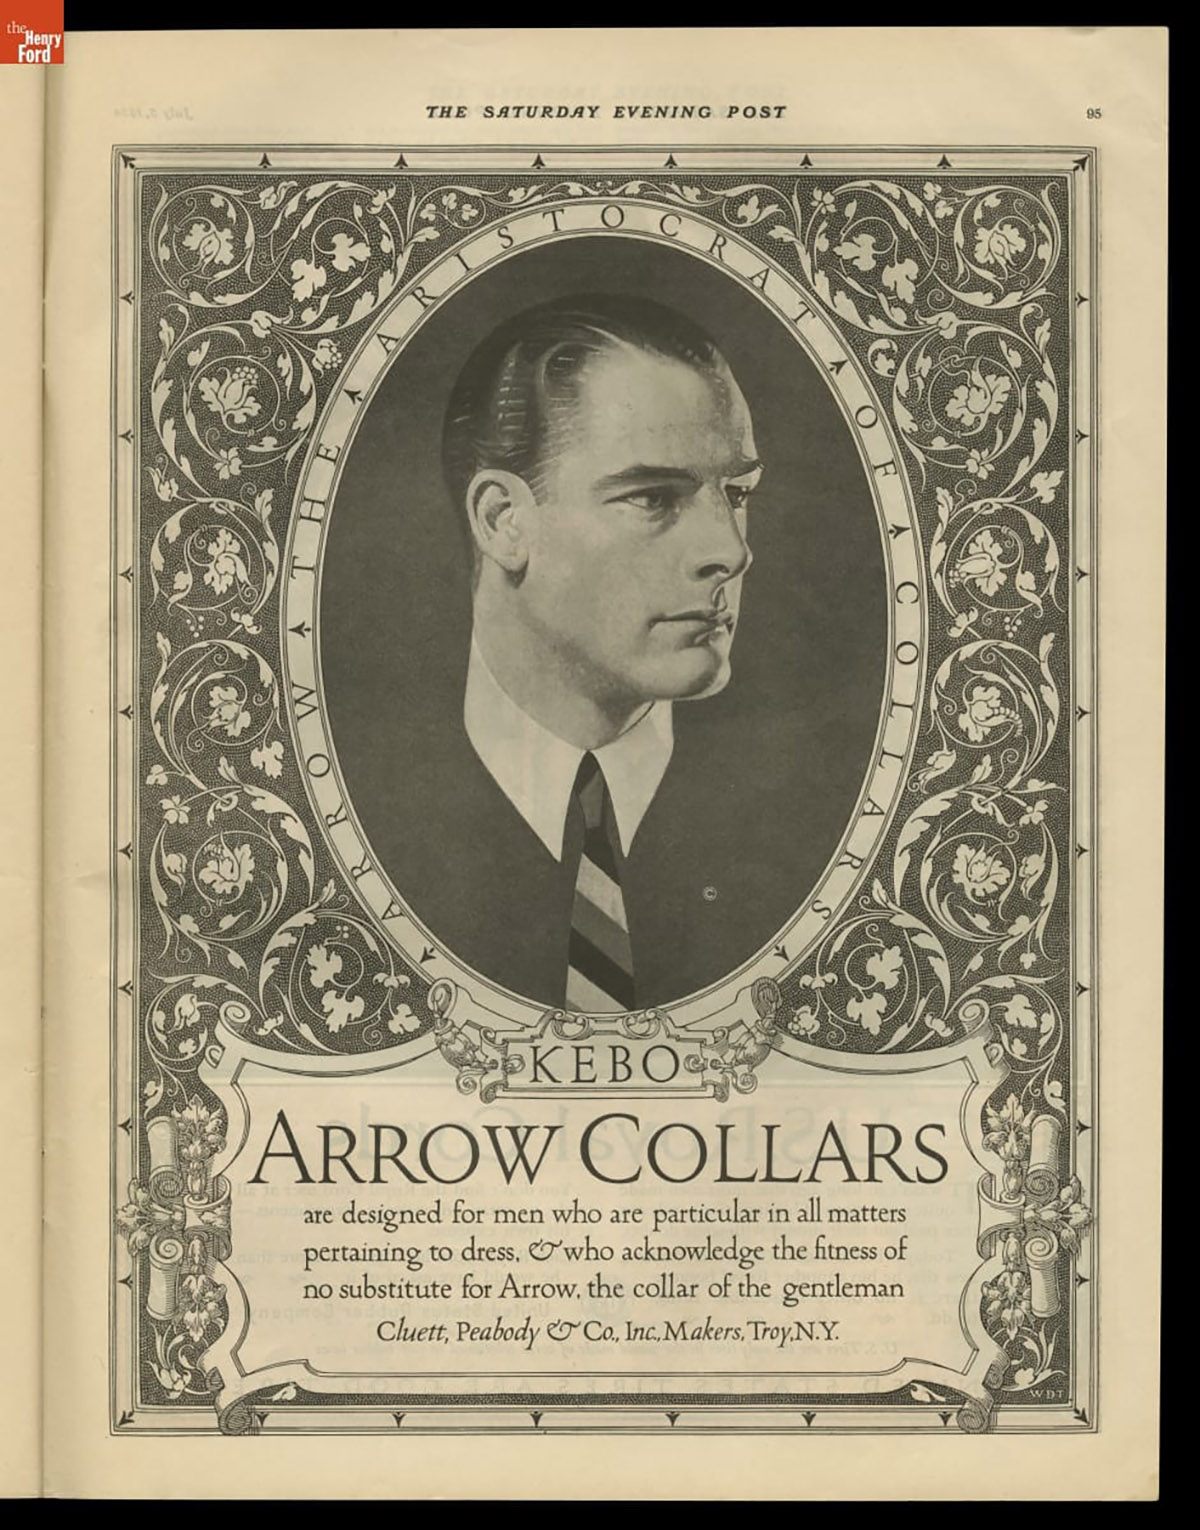 Advertisement for Arrow Collars, featuring Leyendecker’s iconic Arrow Collar Man, The Saturday Evening Post, July 5, 1924.